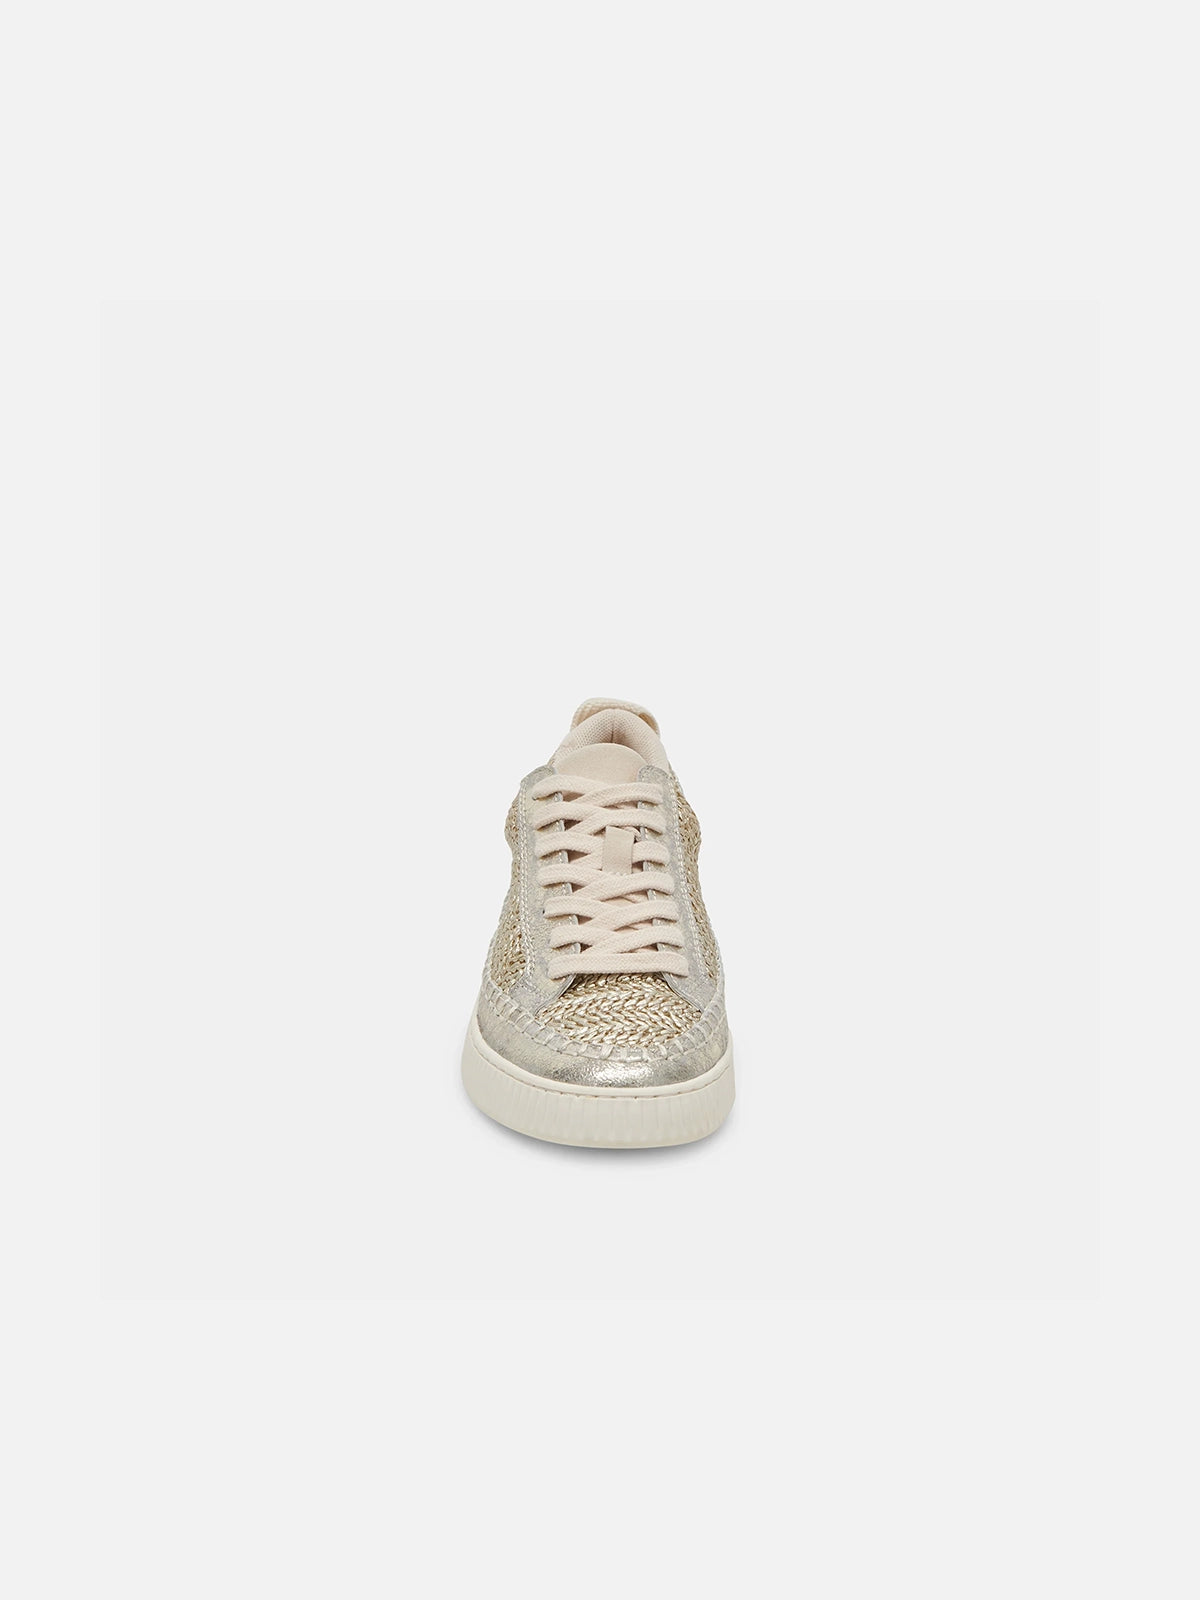 dolce vita nicona sneakers in gold woven